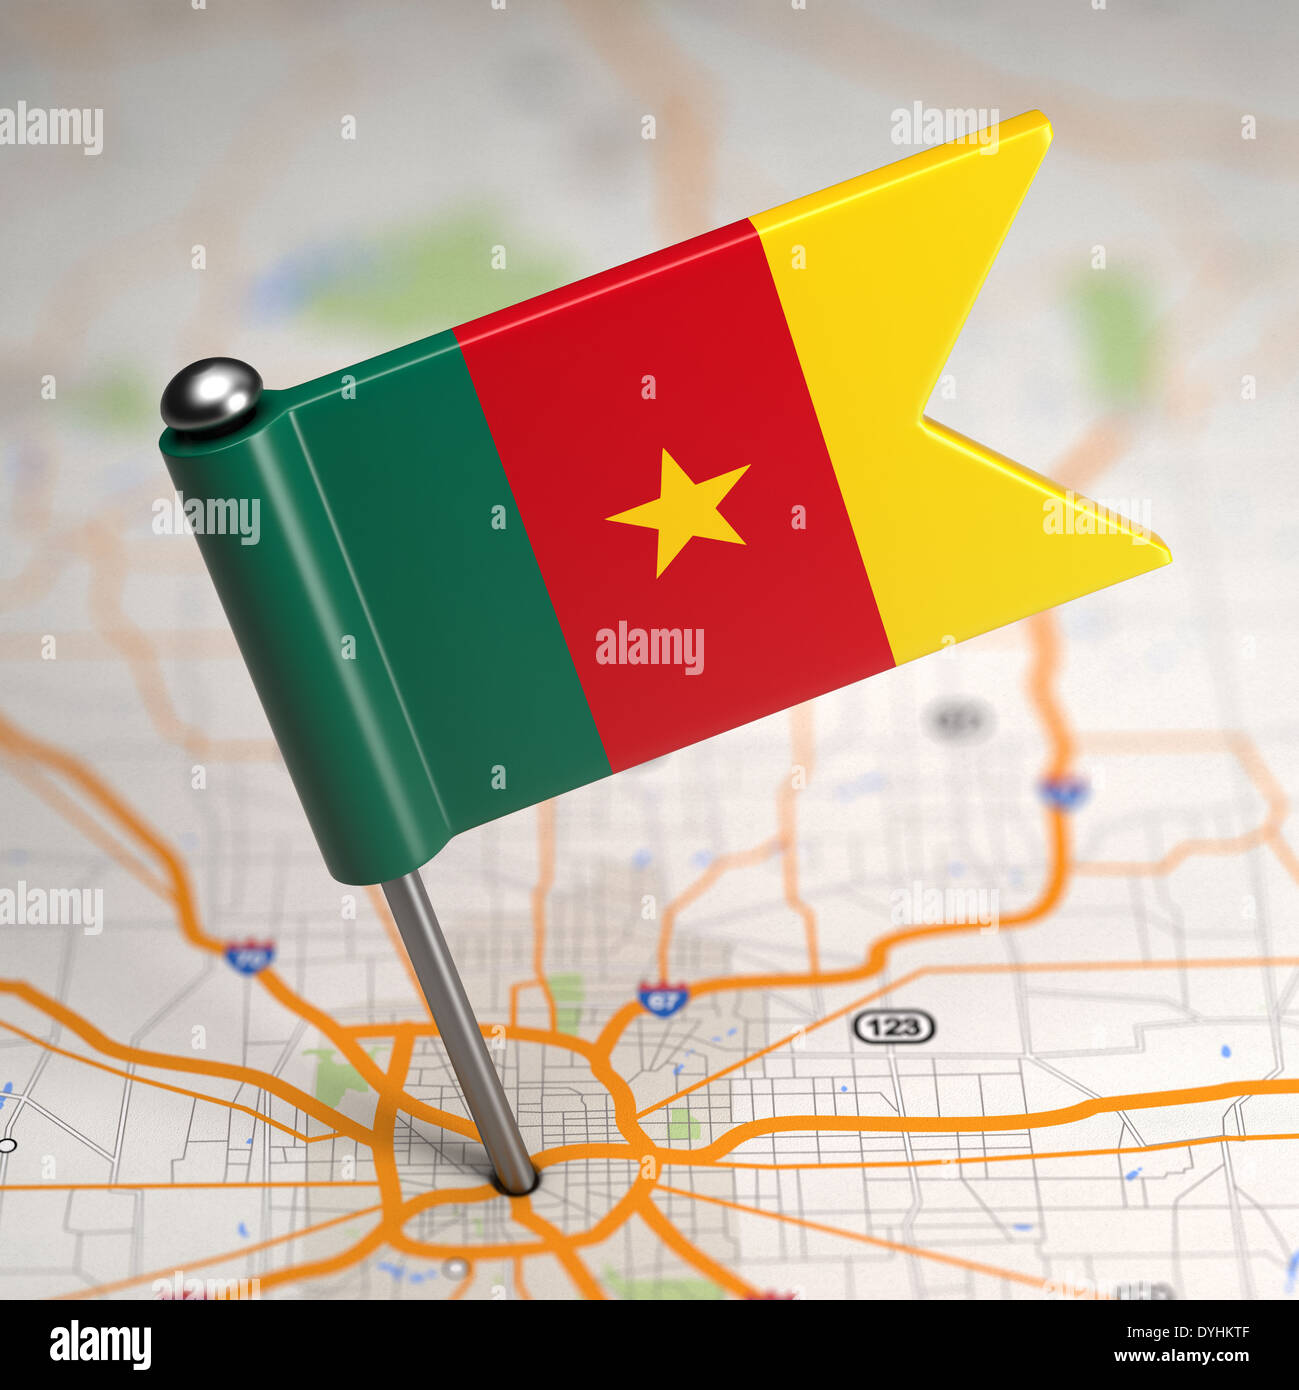 Cameroon Small Flag on a Map Background. Stock Photo